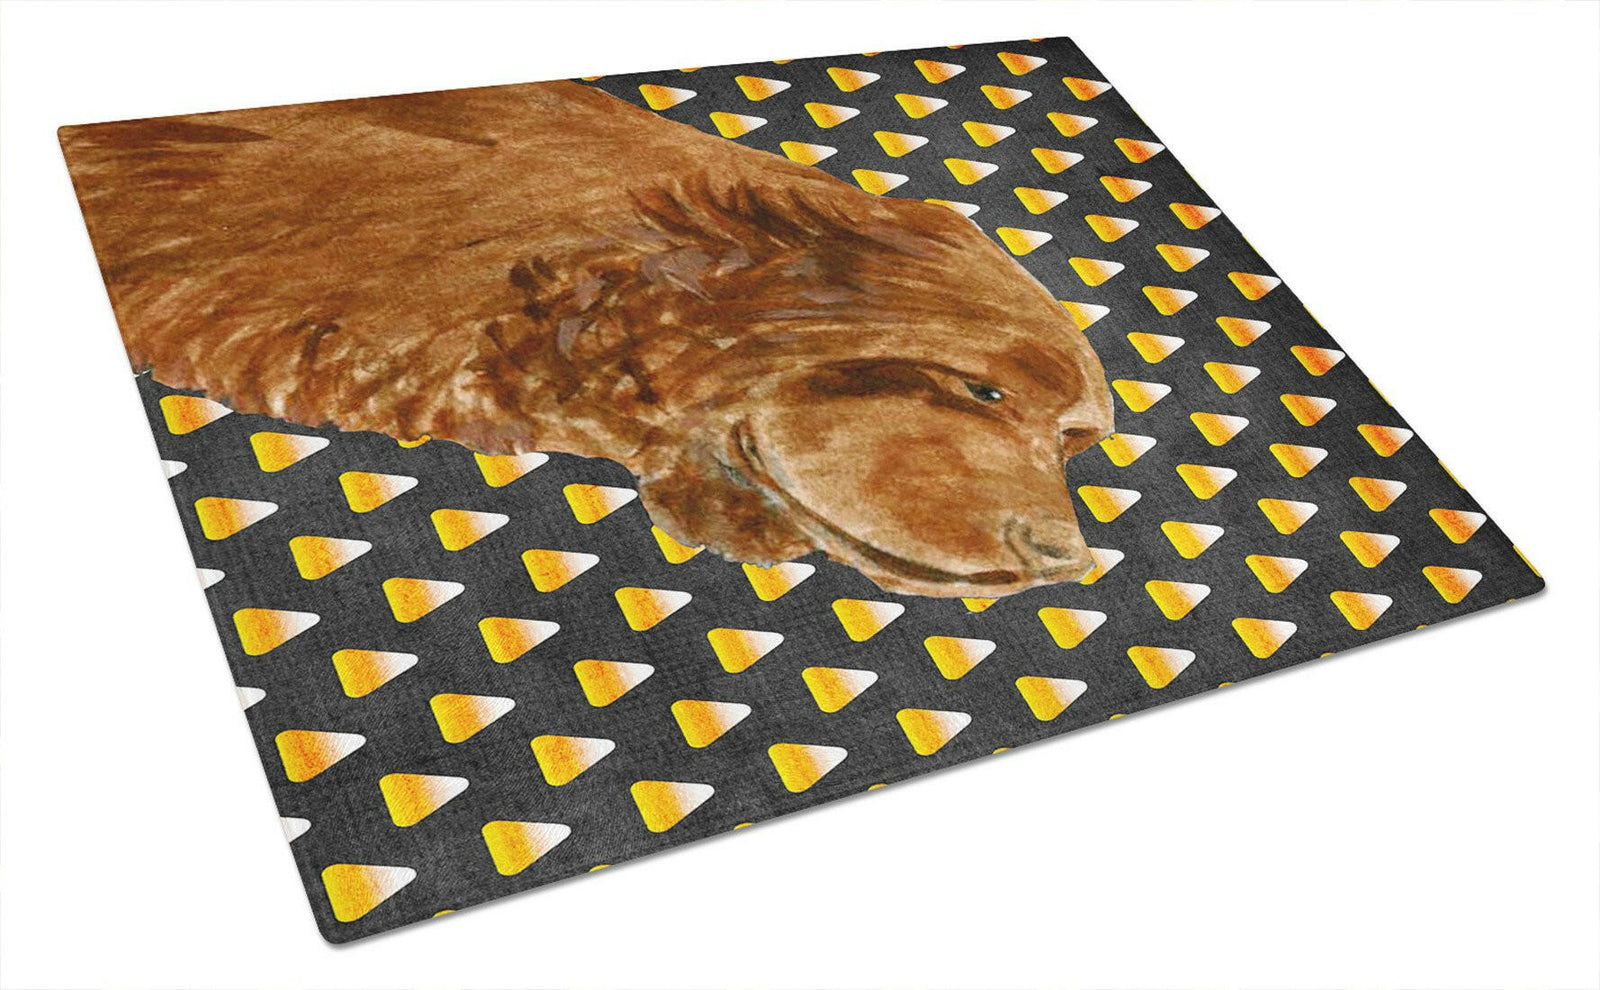 Sussex Spaniel Candy Corn Halloween Portrait Glass Cutting Board Large by Caroline's Treasures